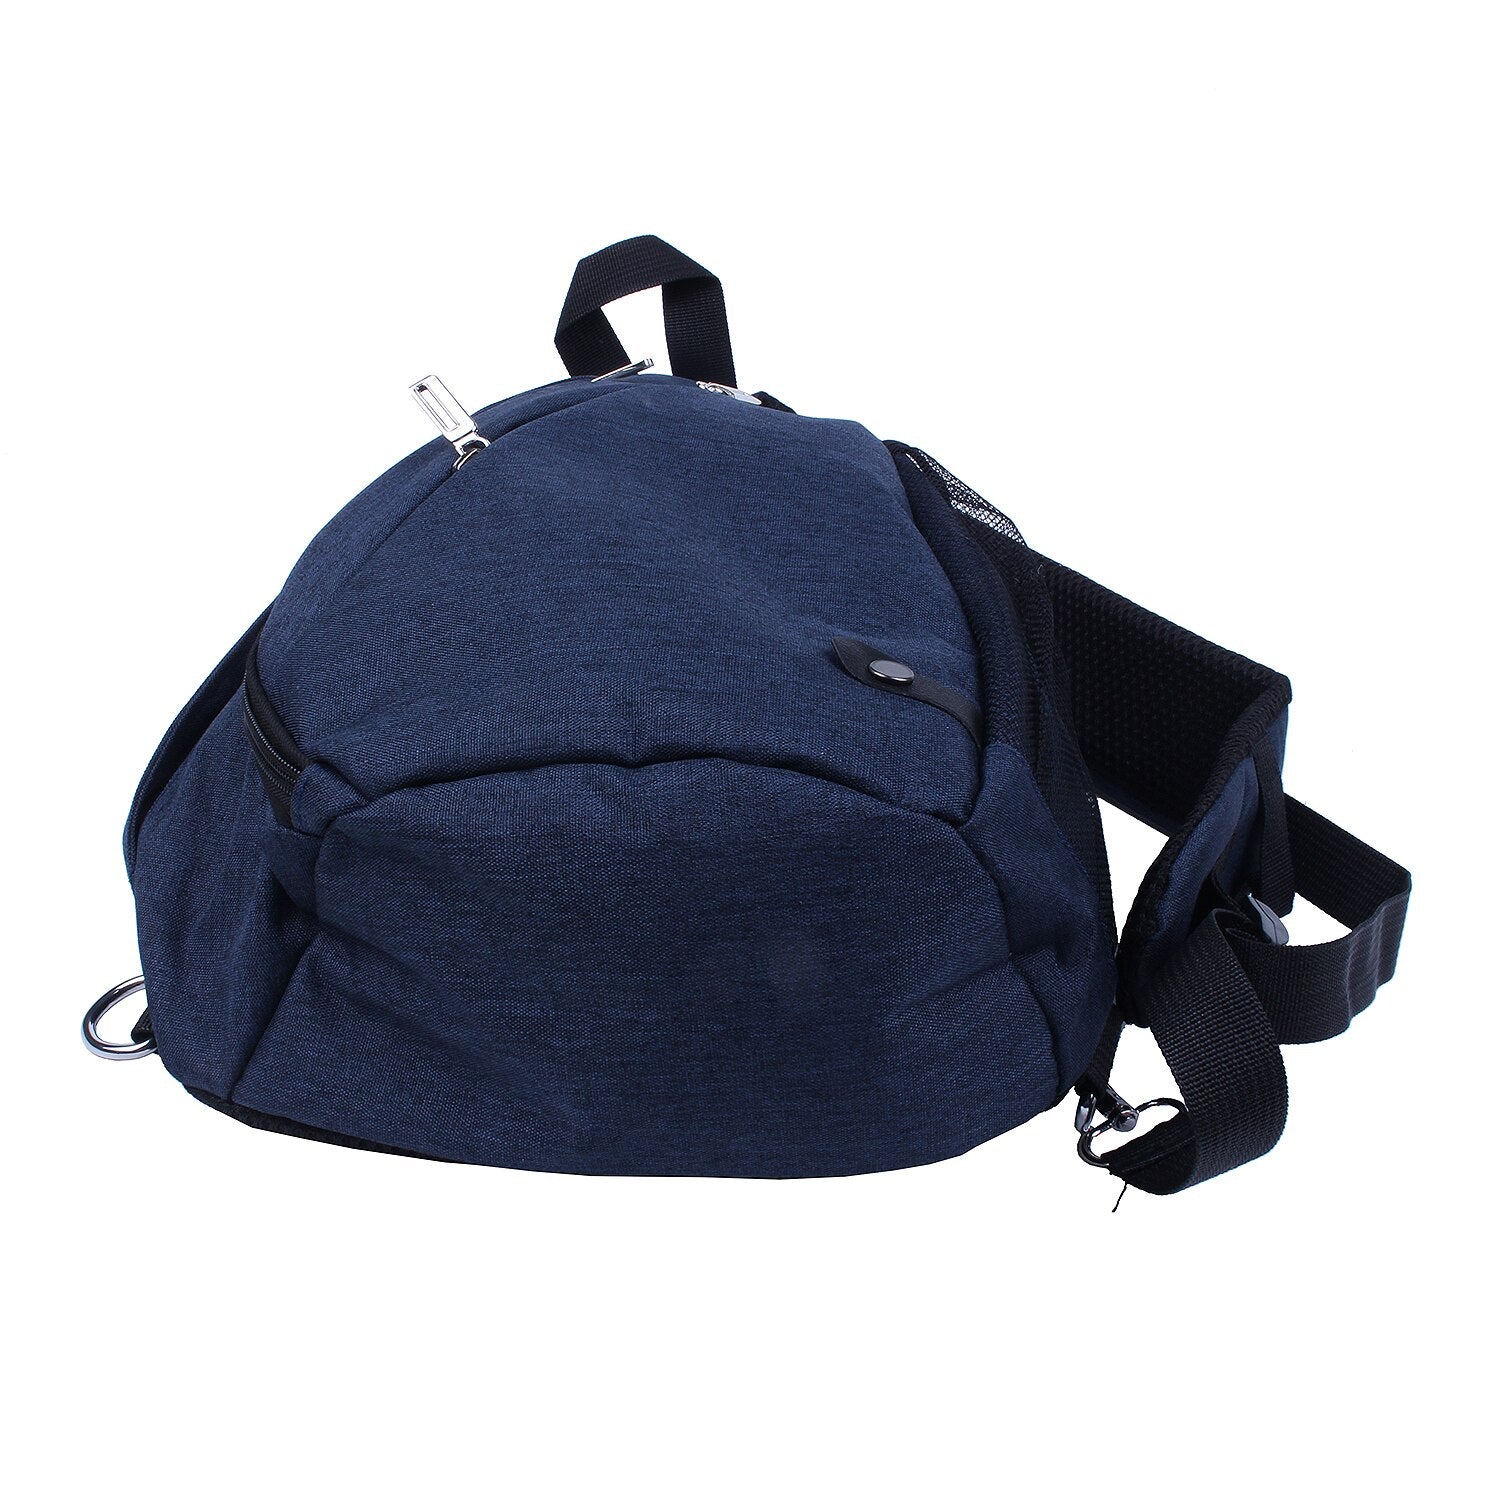 Hot sale Large Capacity Chest Bag For Men Nylon Sling Bag Casual Crossbody Bags For Short Trip - ebowsos